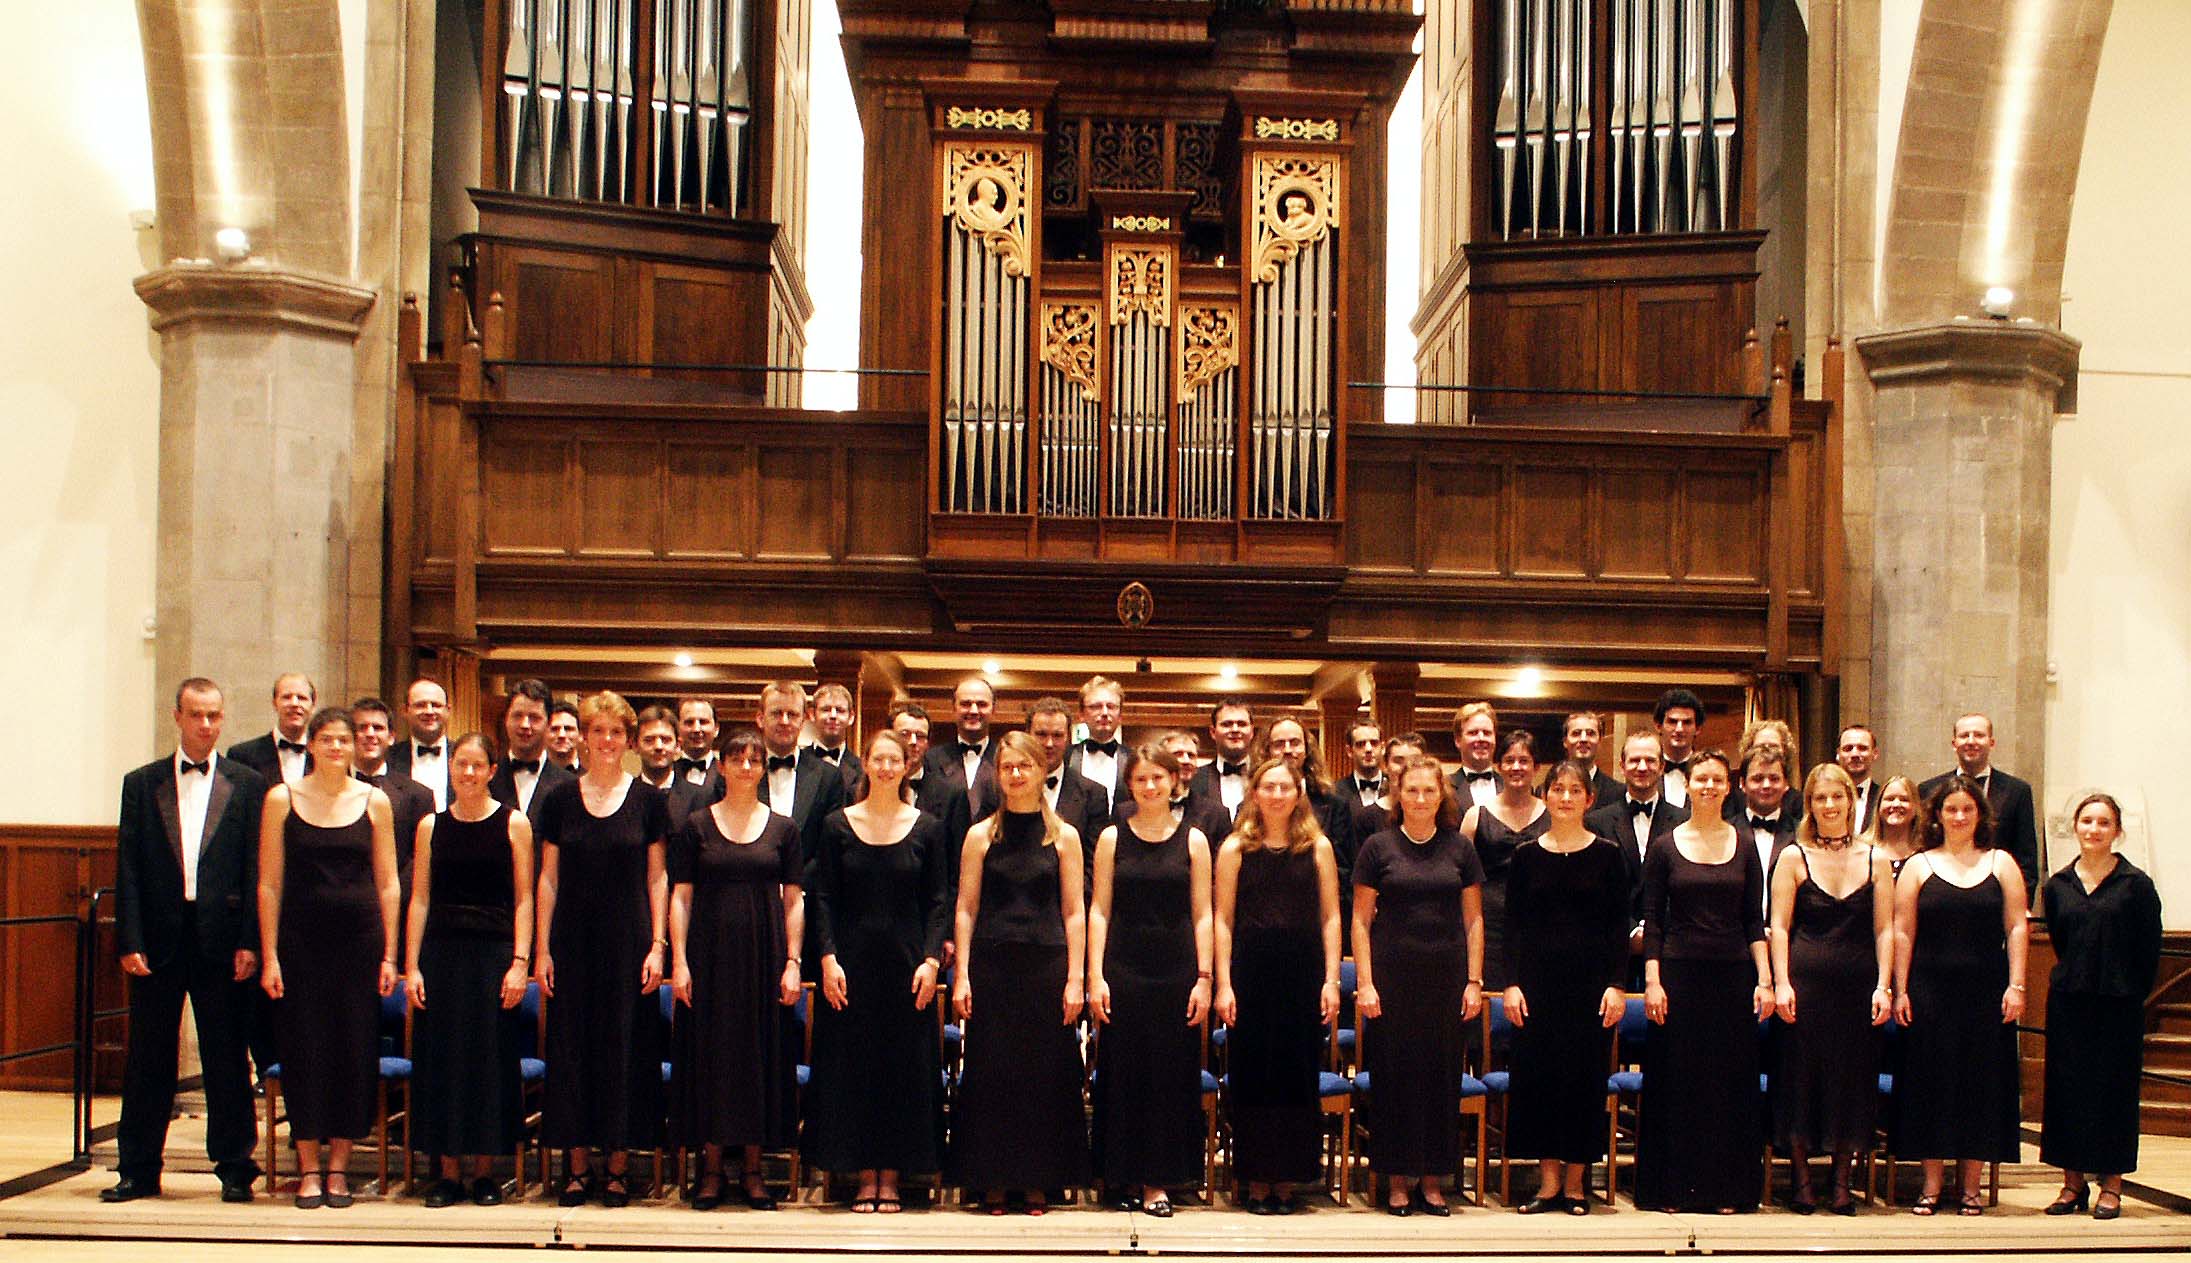 Photograph of ExColl in Greyfriars Kirk, Edinburgh, Summer 2004